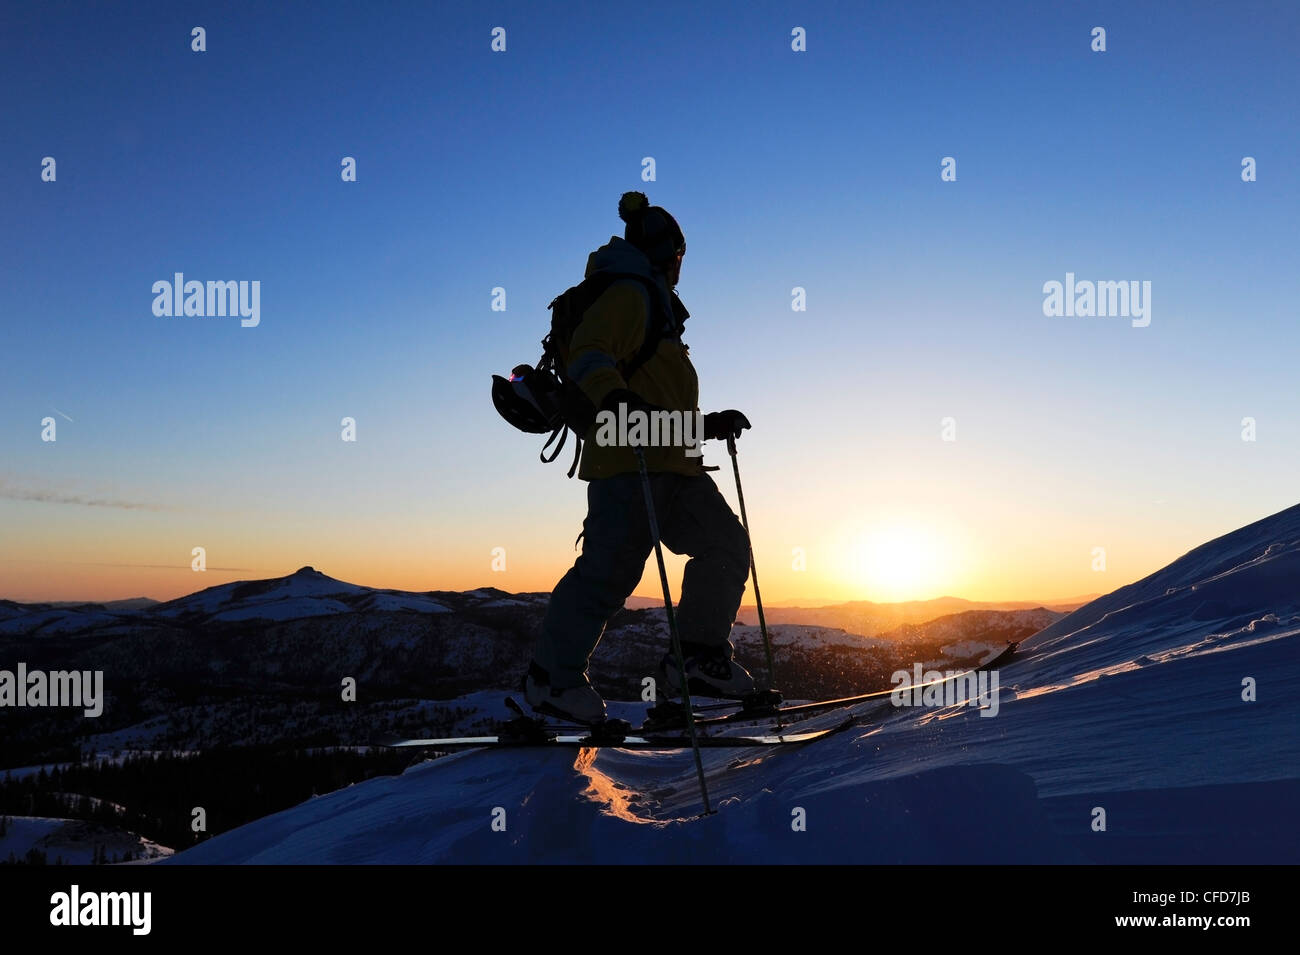 A silhouette of a skier watching sunrise in the Sierra Nevada near Lake Tahoe, California. Stock Photo